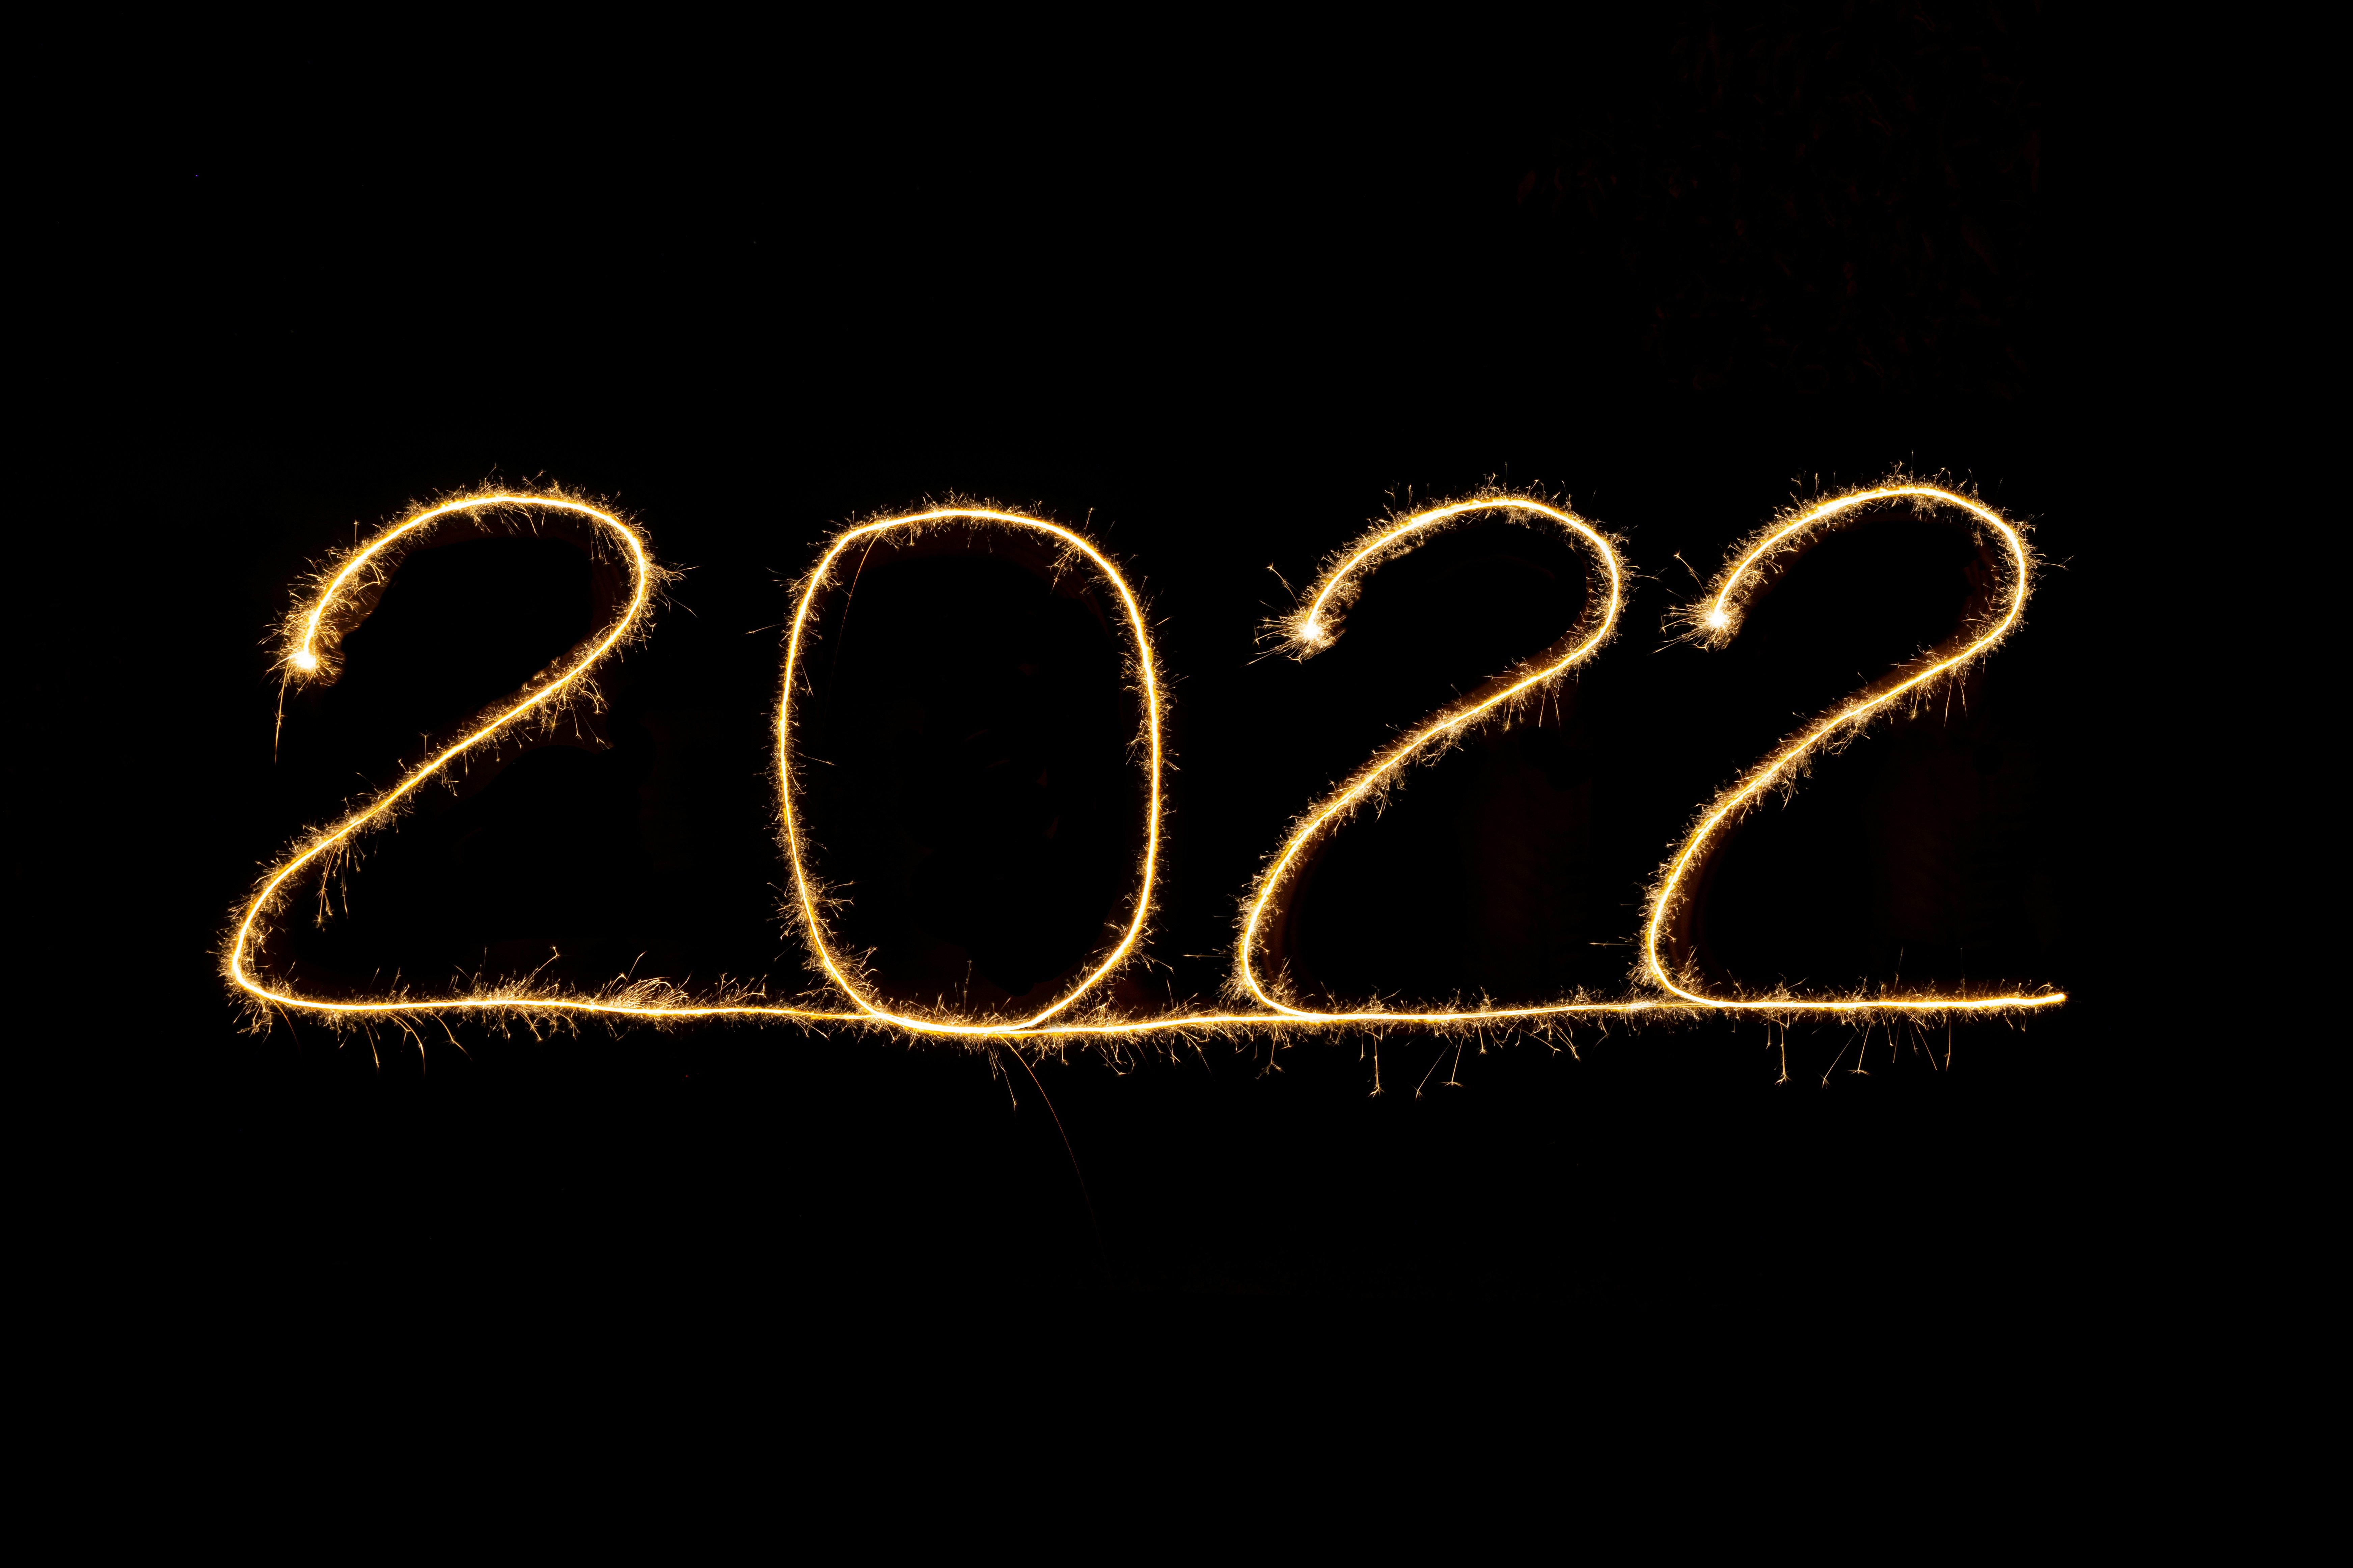 happy new year 2022, lightpainted 2022 on black background, greetingcard template, space for text, burning sparkler light 2022